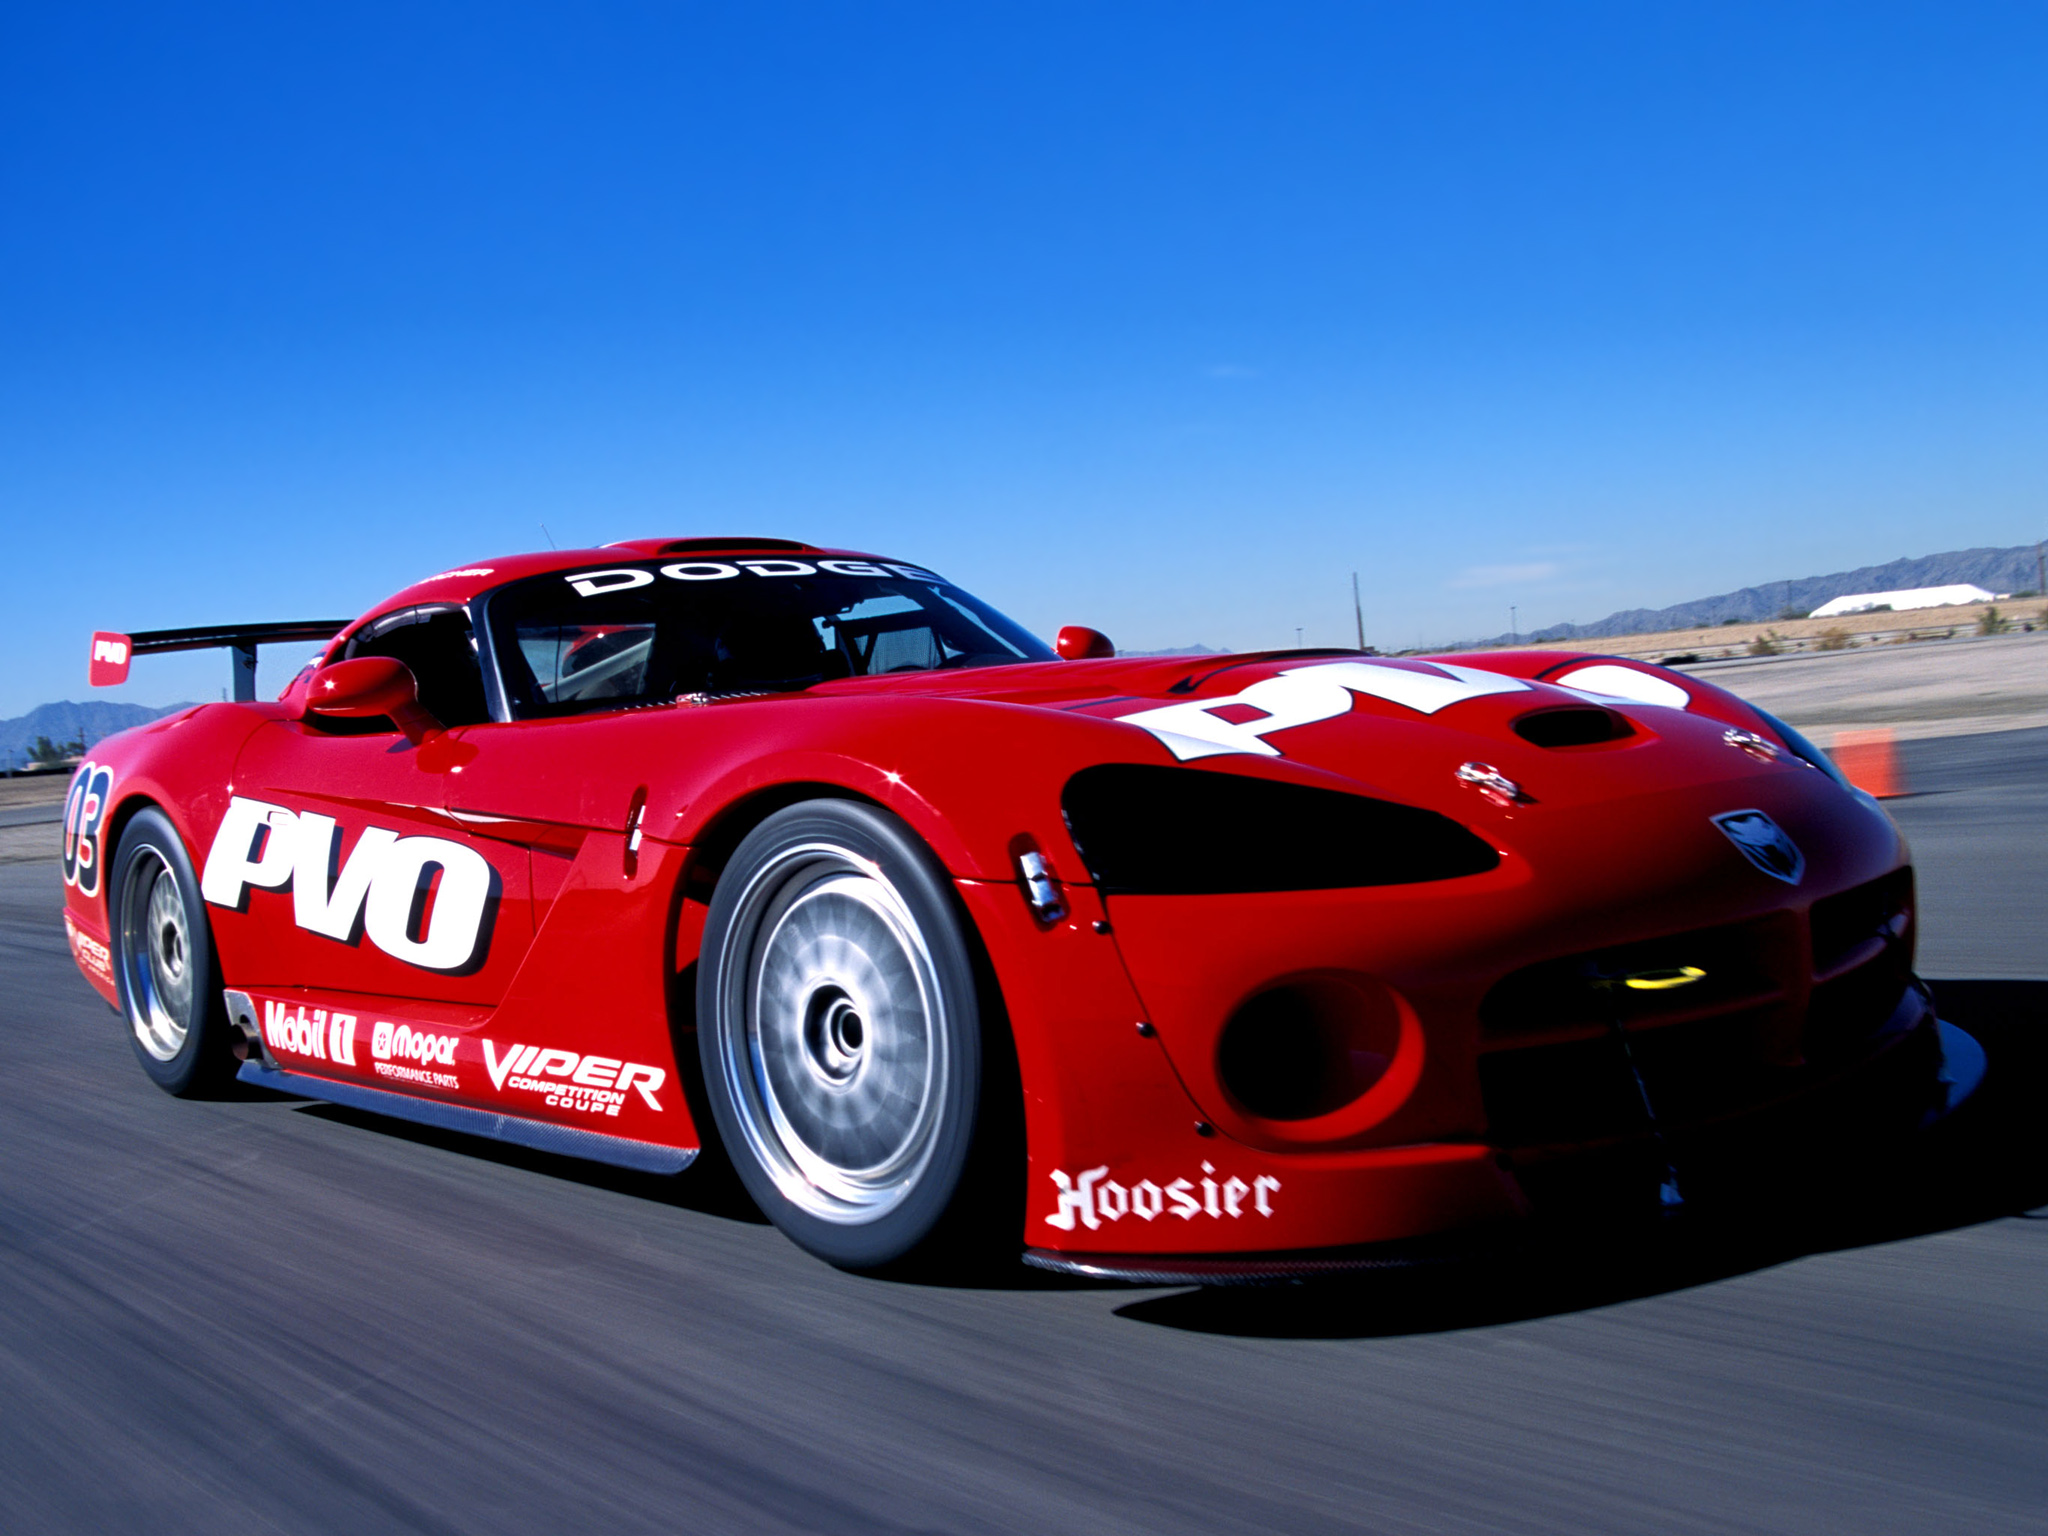 20, 02dodge, Viper, Srt10, Competition, Coupe, Race, Racing, Supercar, Supercars Wallpaper